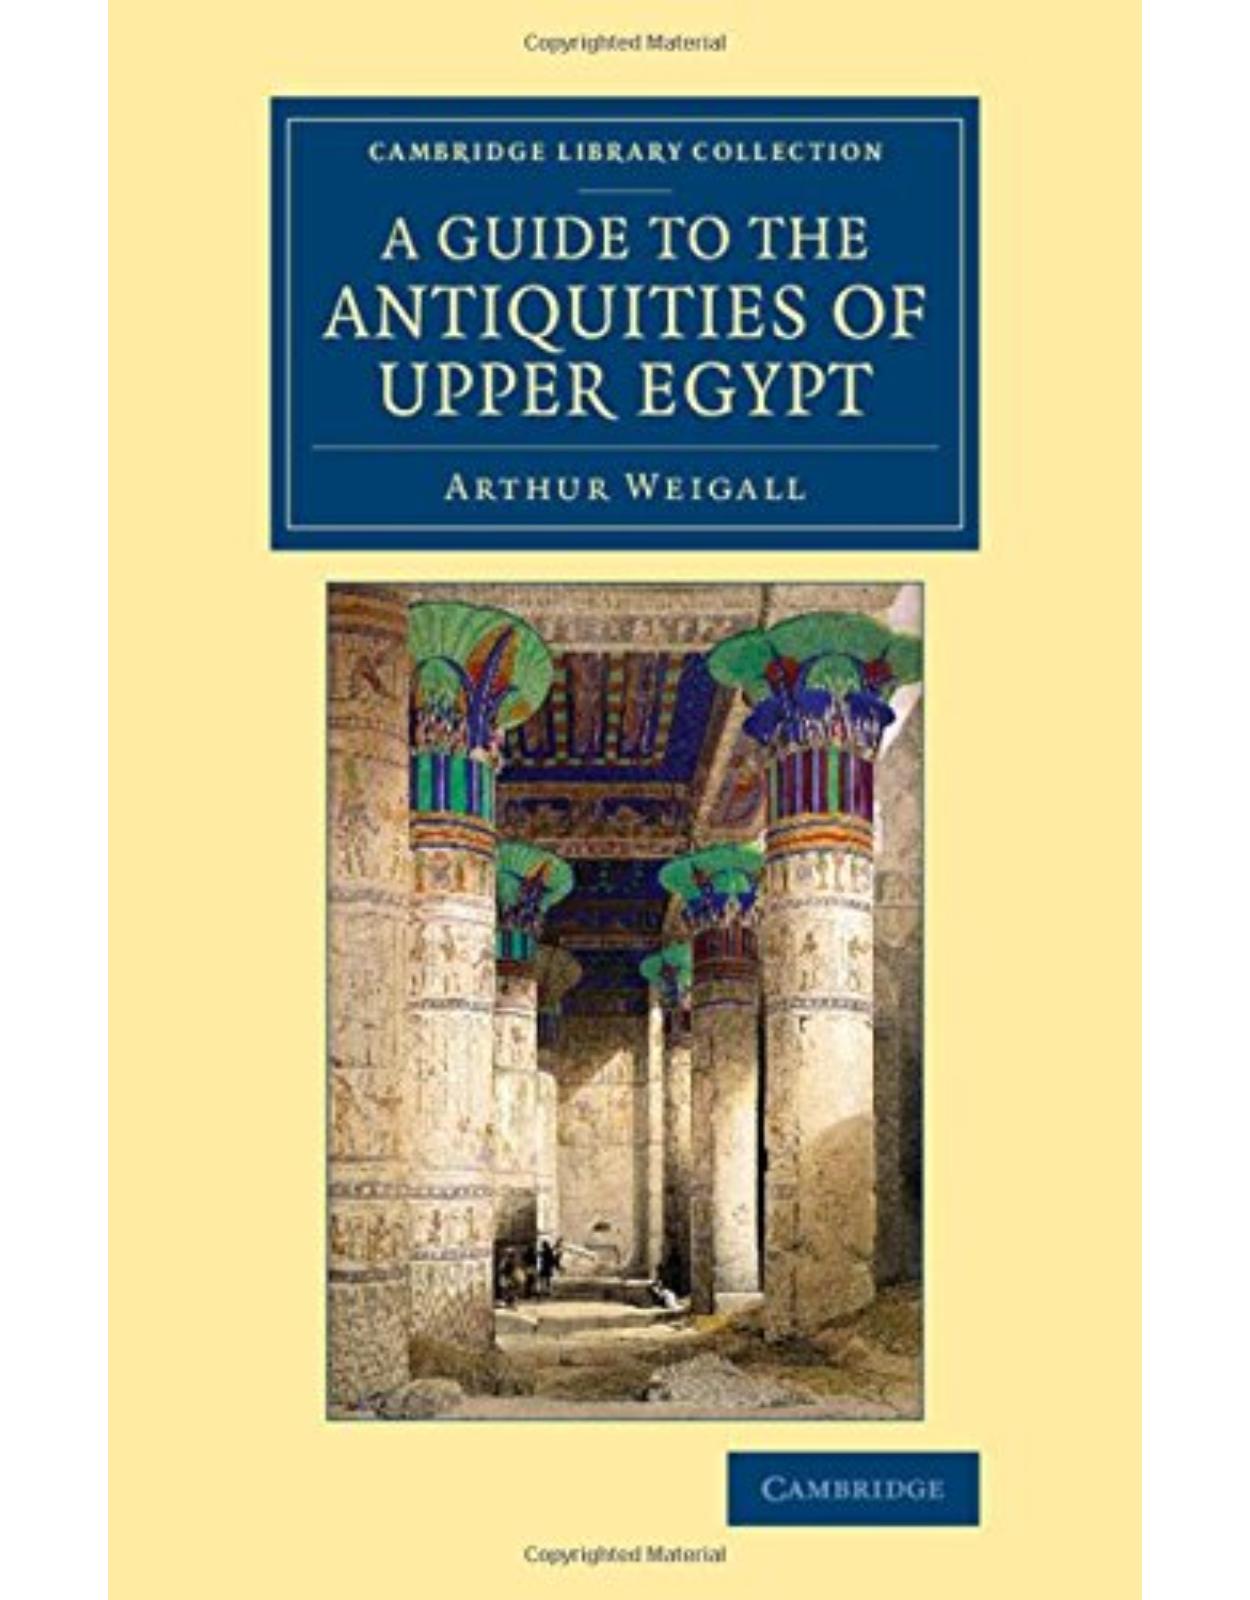 A Guide to the Antiquities of Upper Egypt: From Abydos to the Sudan Frontier (Cambridge Library Collection - Egyptology) 